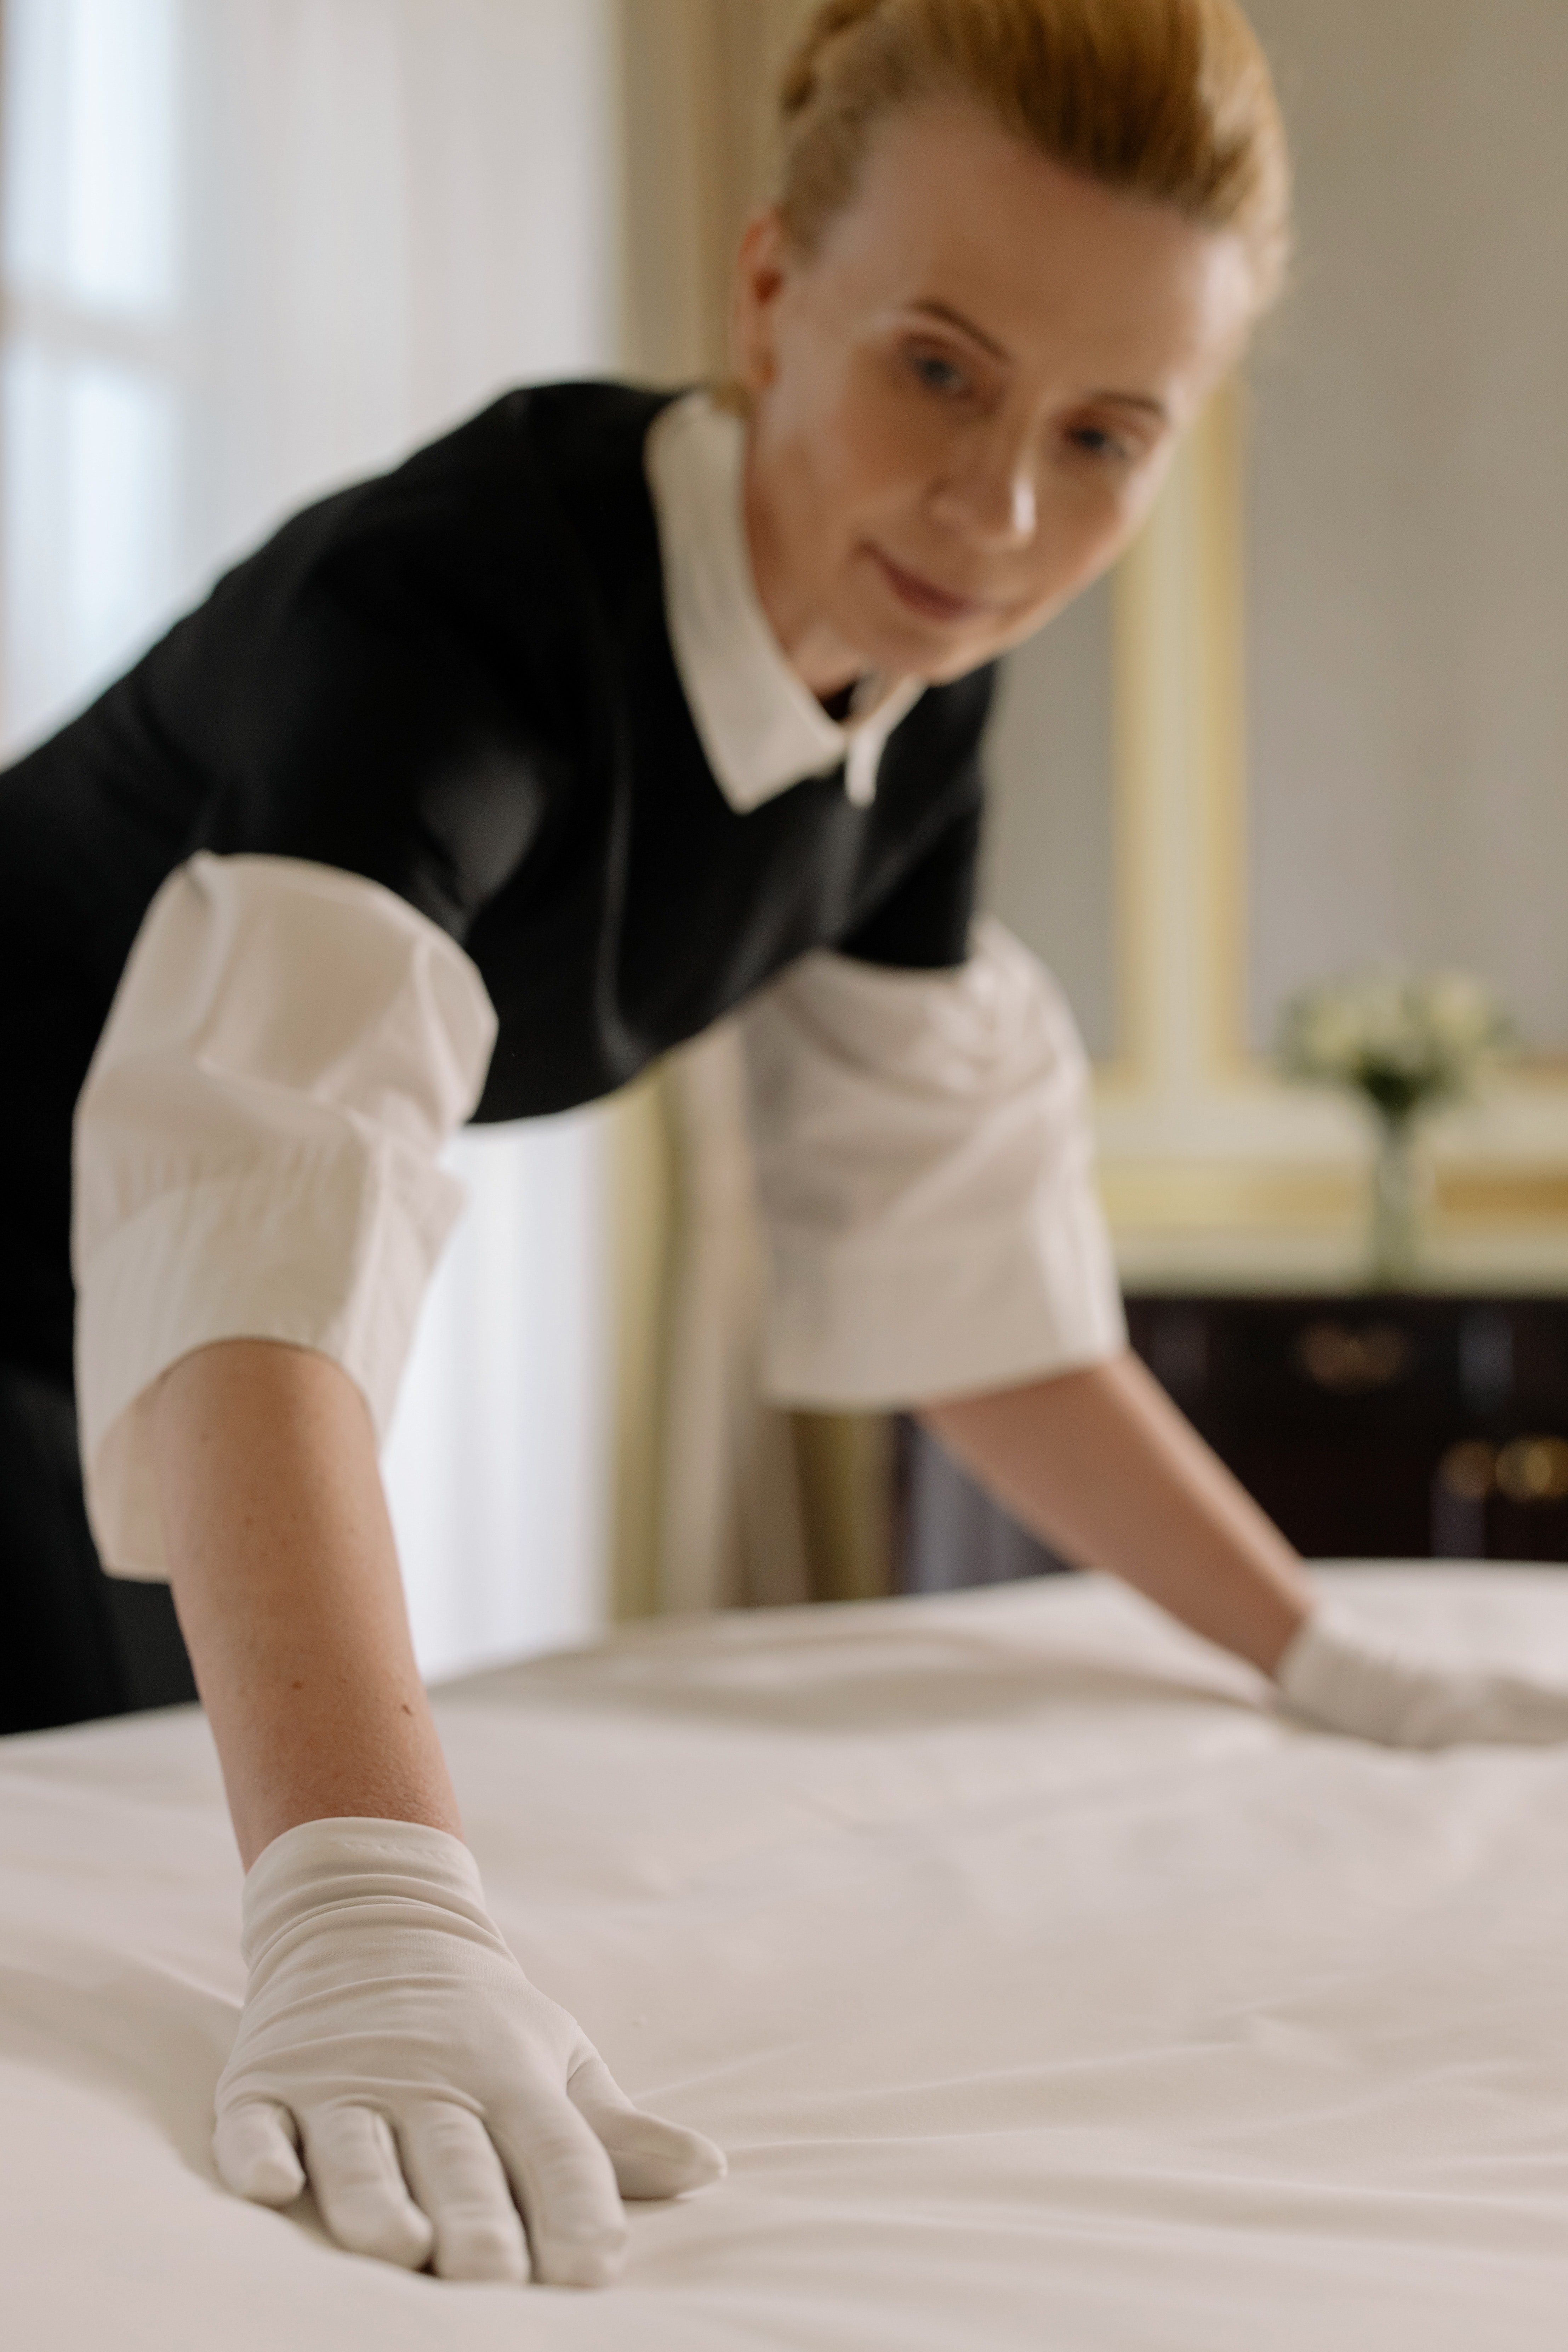 At first, the new maid was quiet and polite. | Source: Pexels